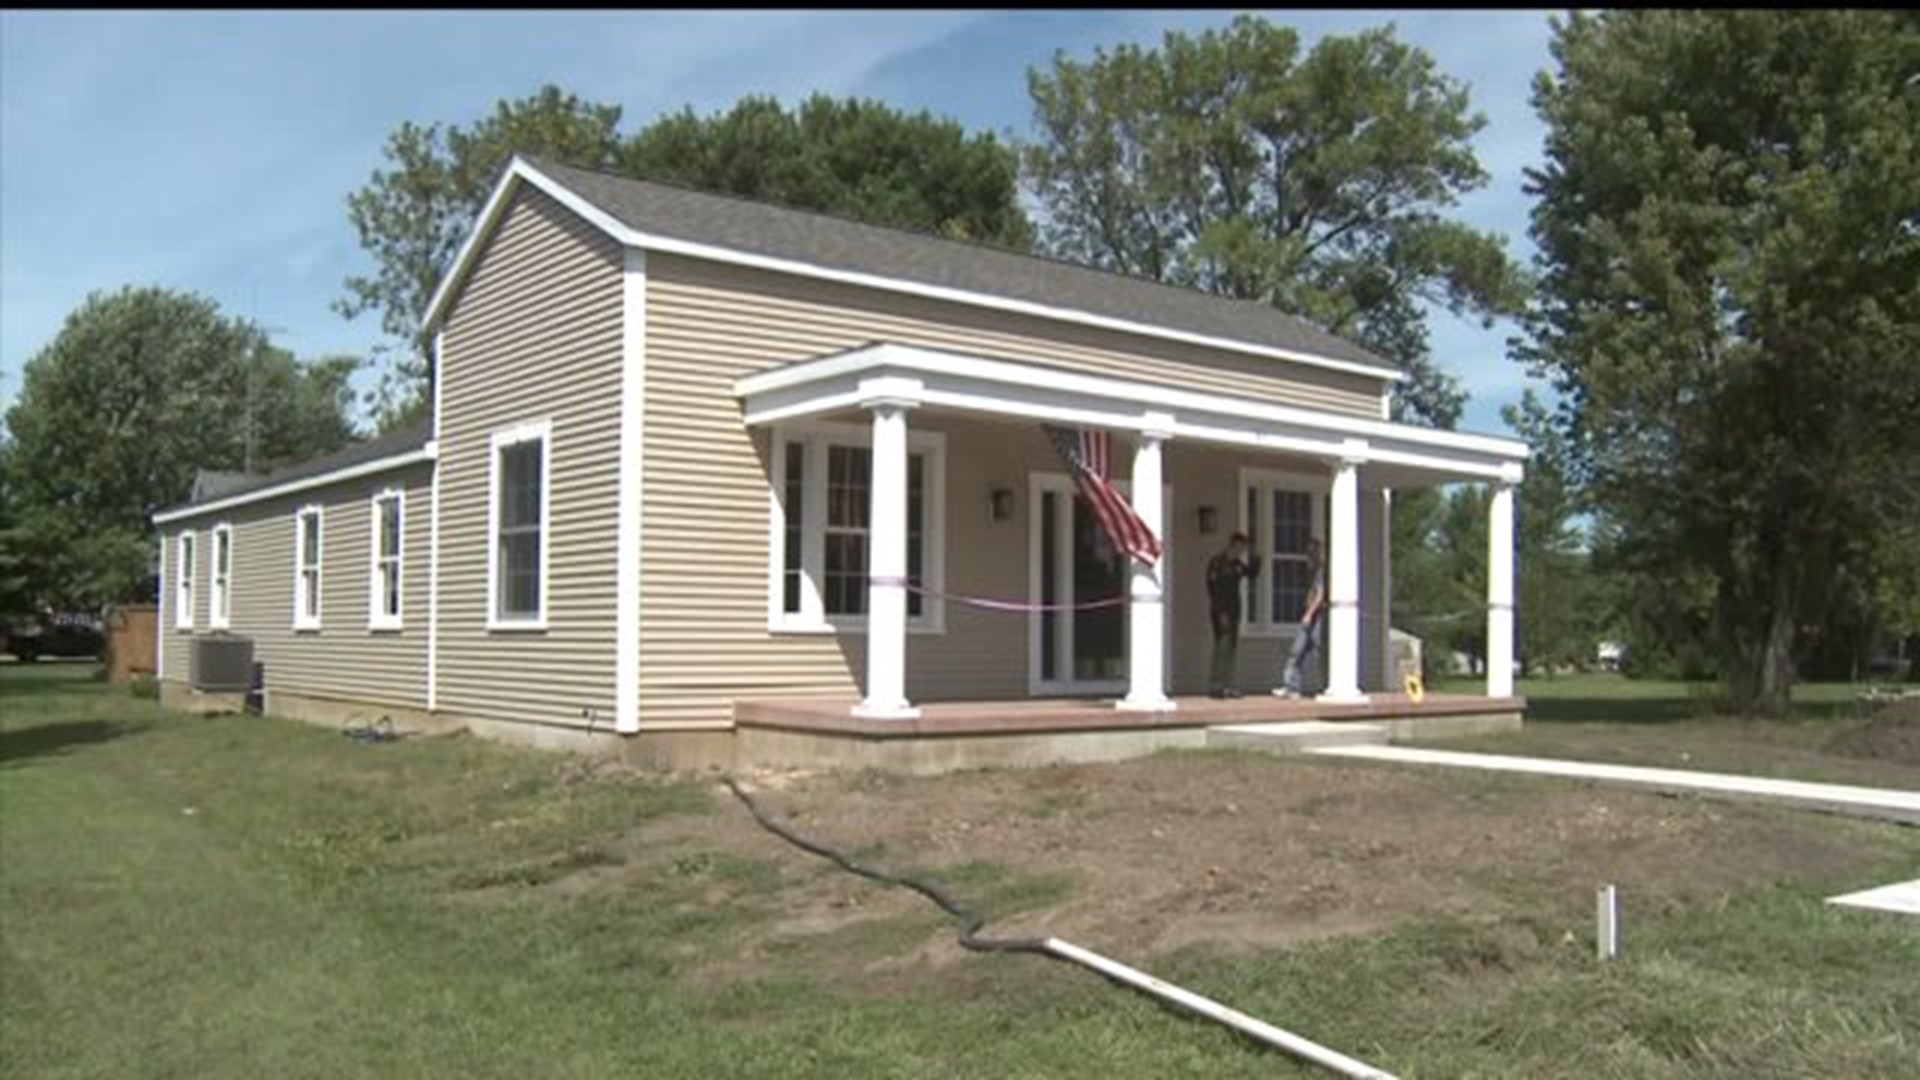 Soldier and his family move into home built by volunteers